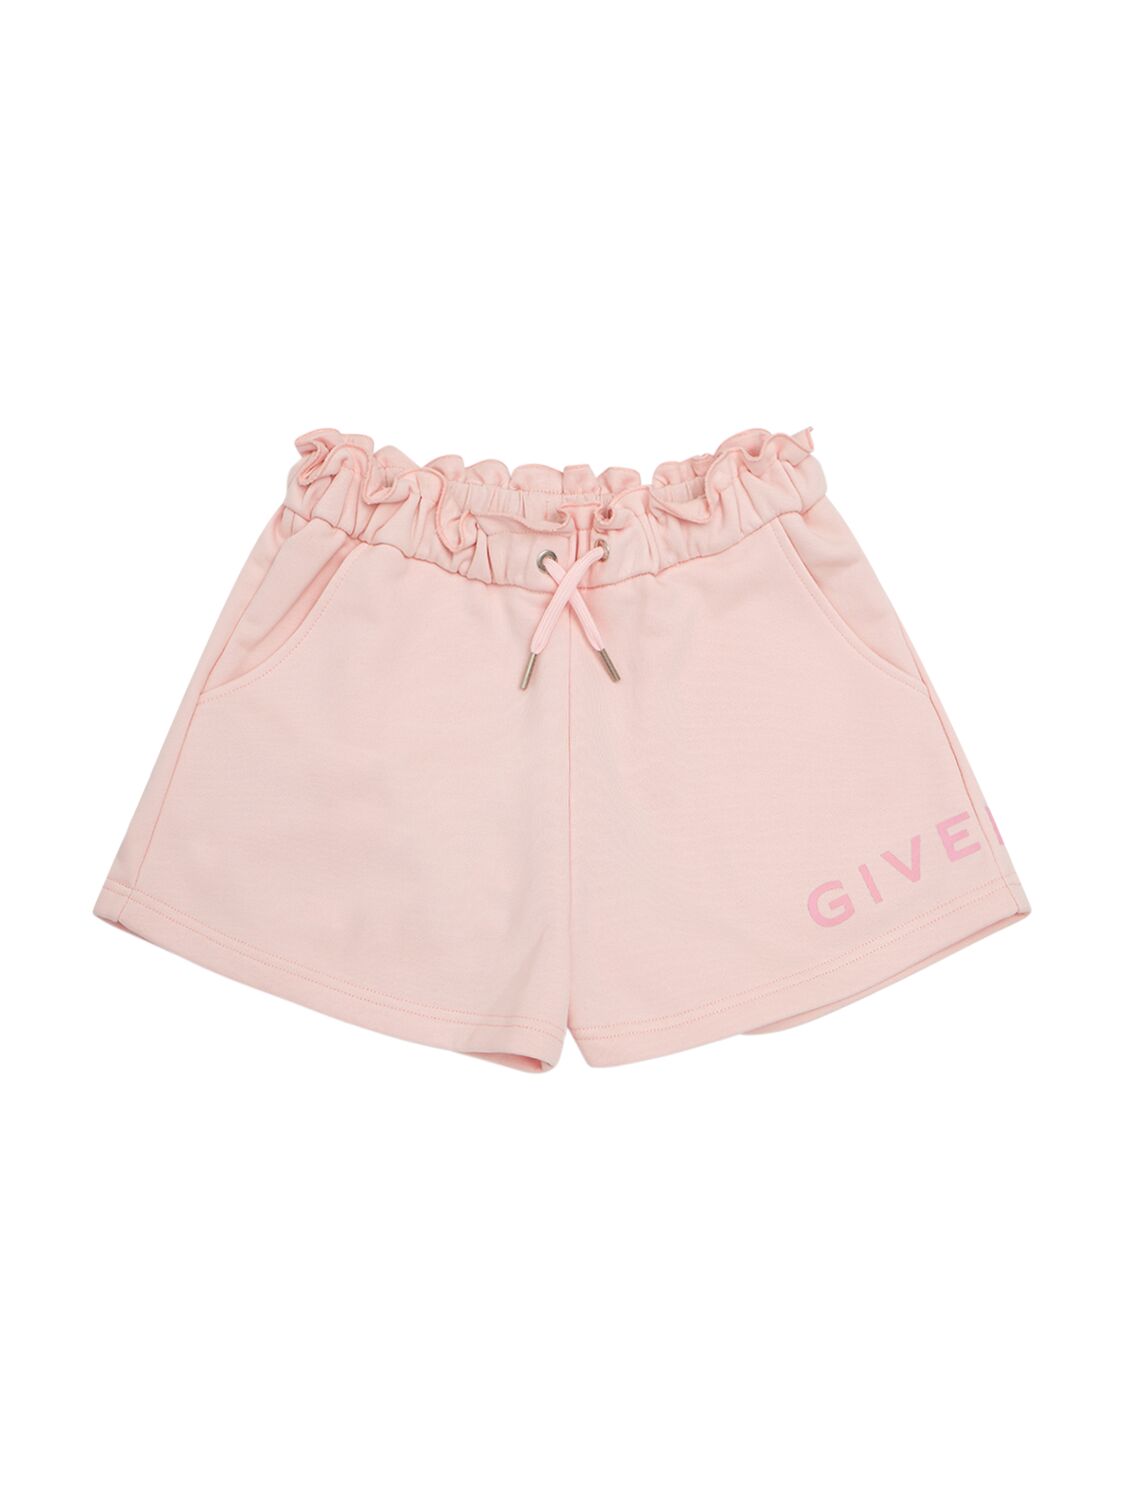 Givenchy 混棉短裤 In Pink